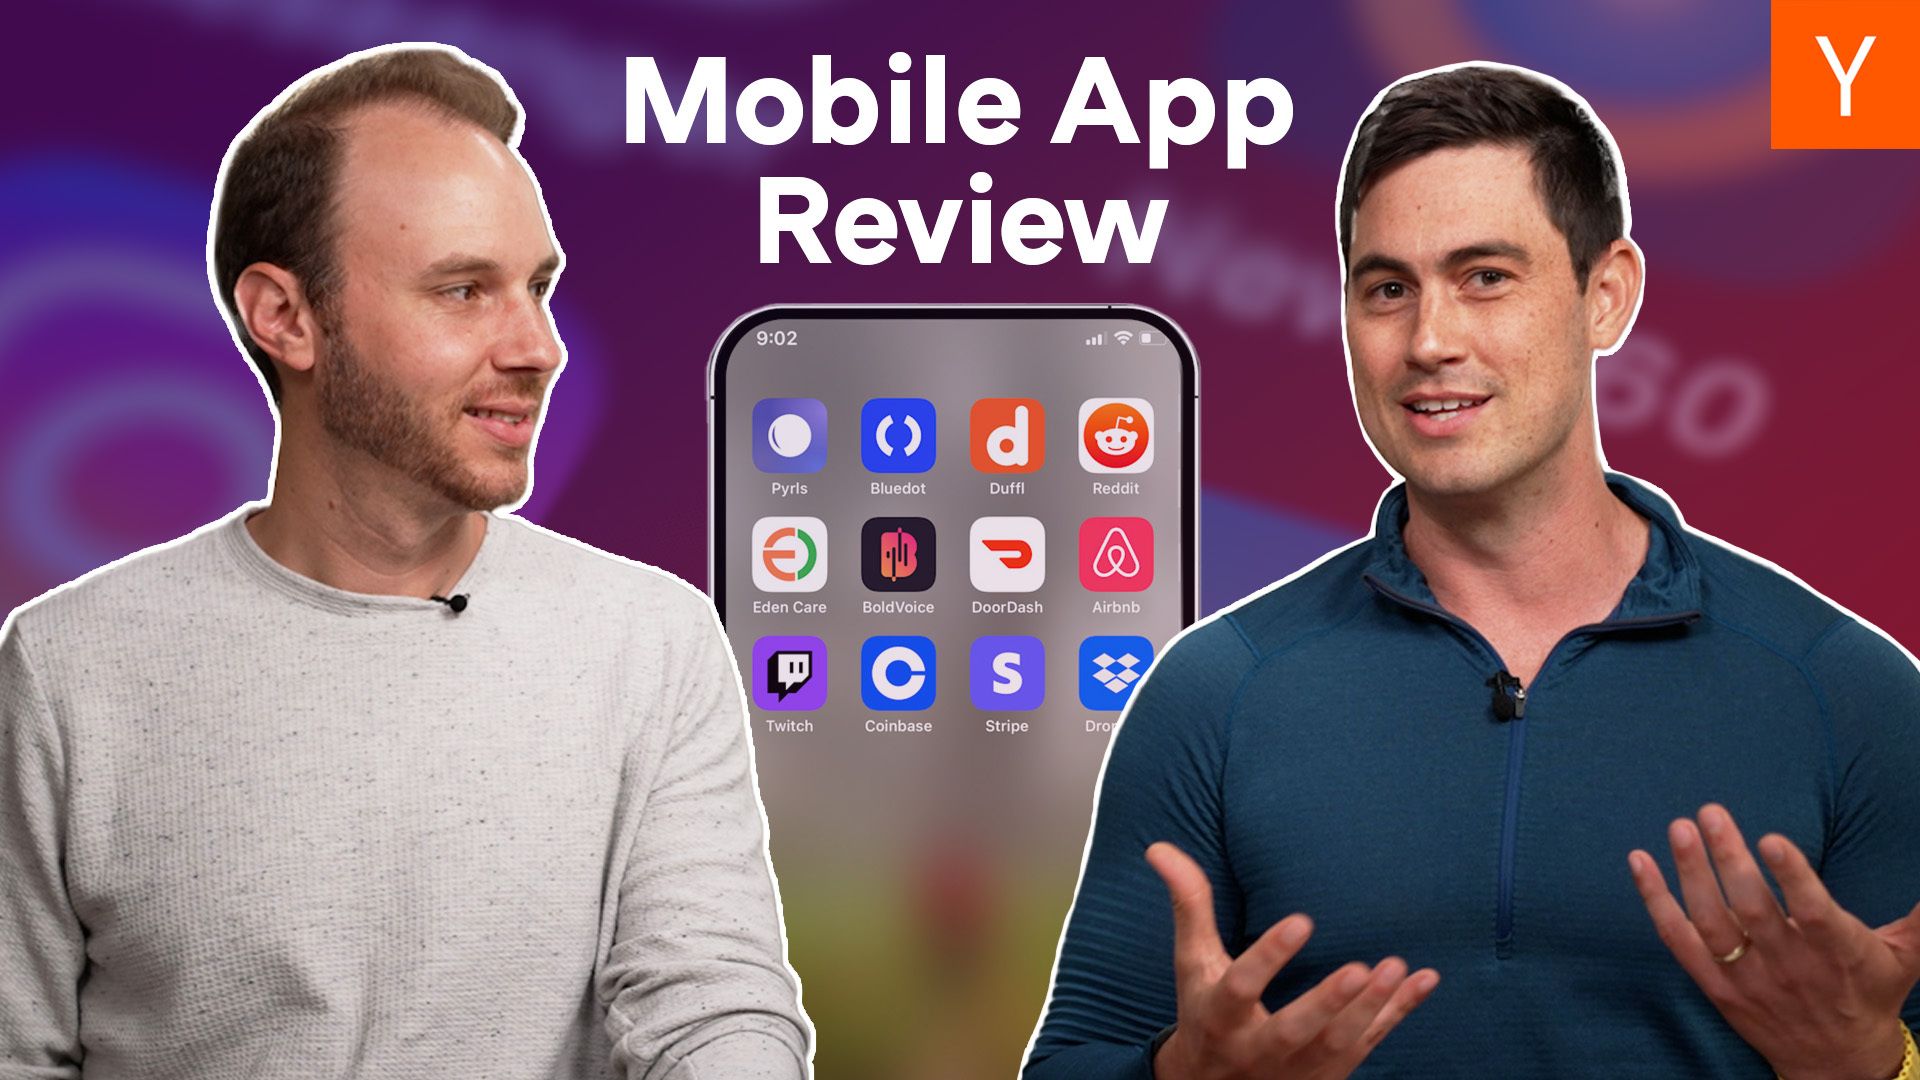 YC Group Partner Aaron Epstein and Glide co-founder David Siegel in front of the text "Mobile App Review"